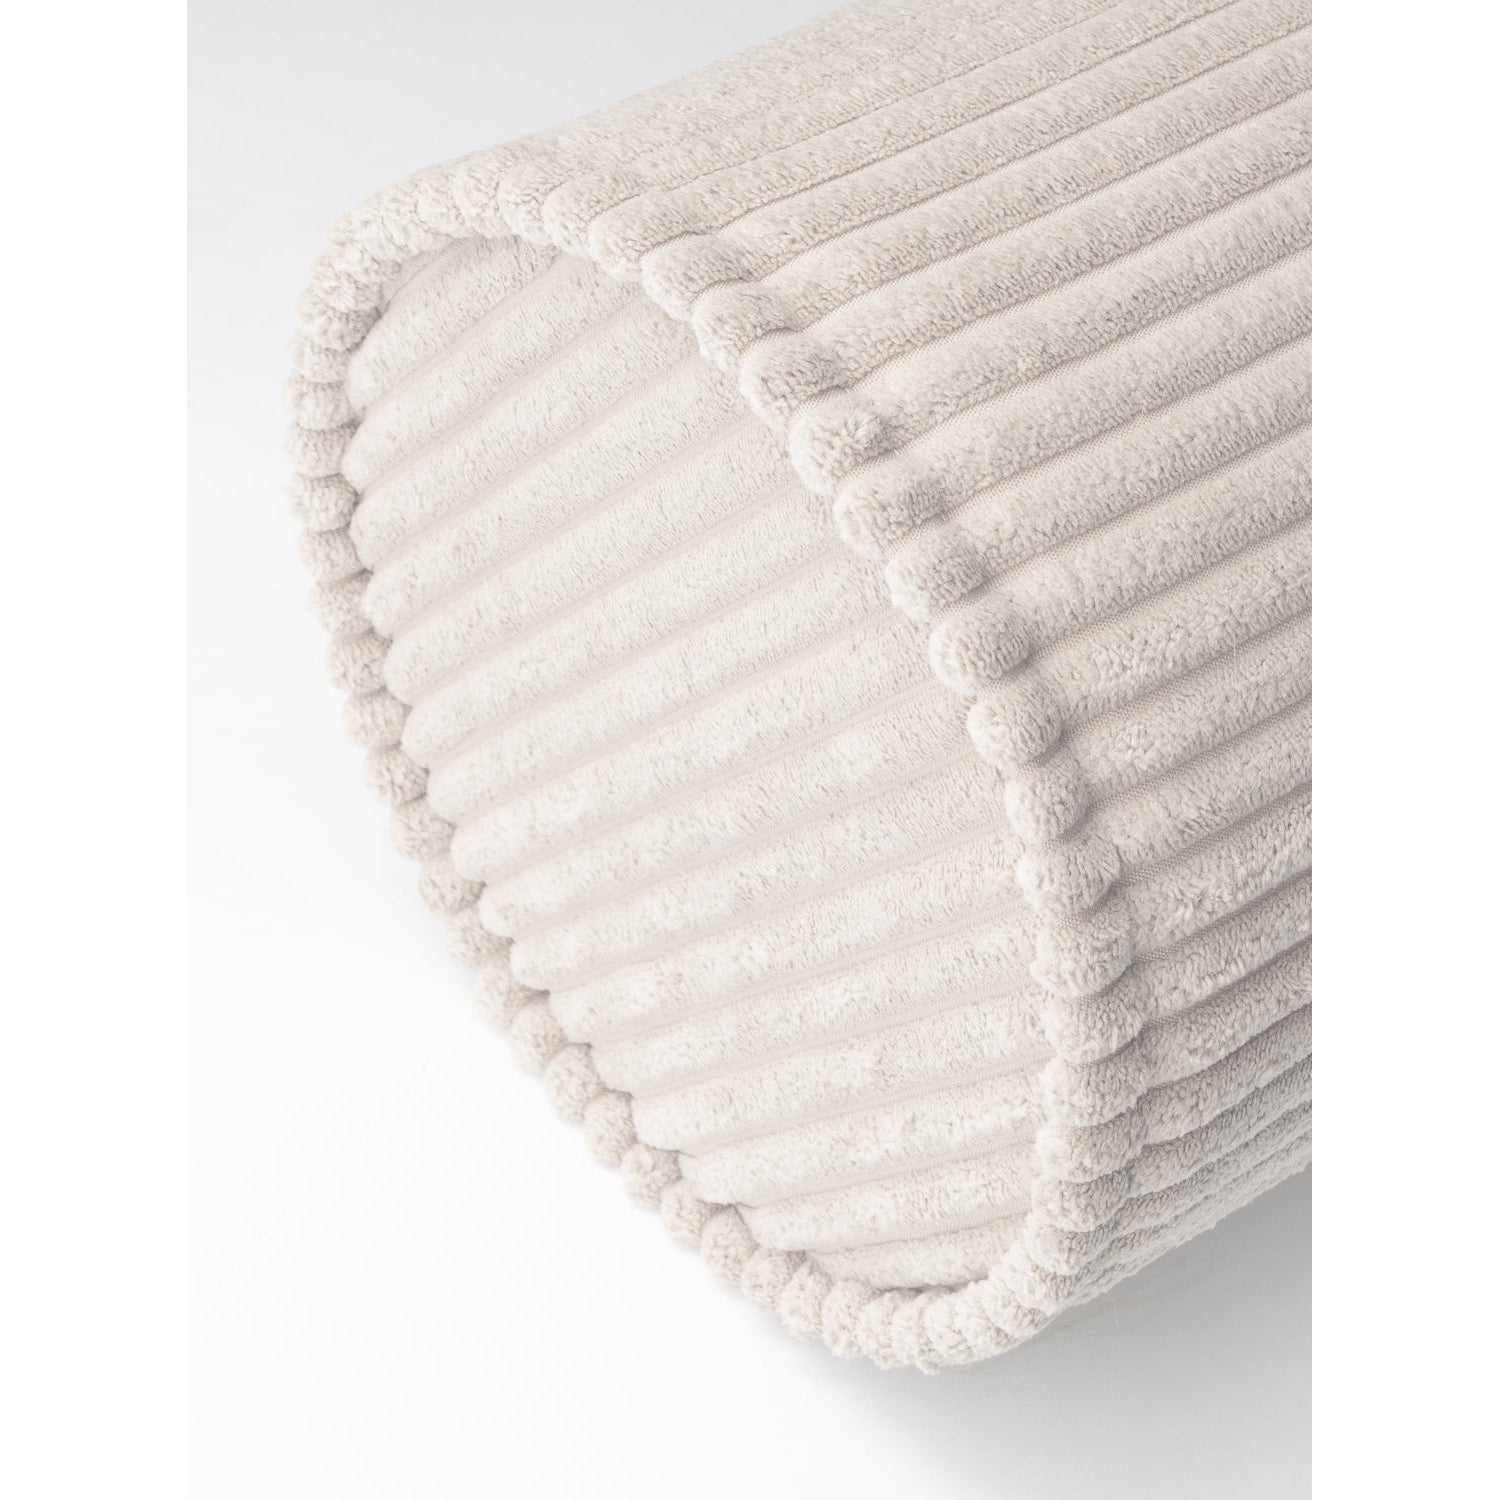 Wigiwama Marshmallow Roll Cushion at Rugs by Roo